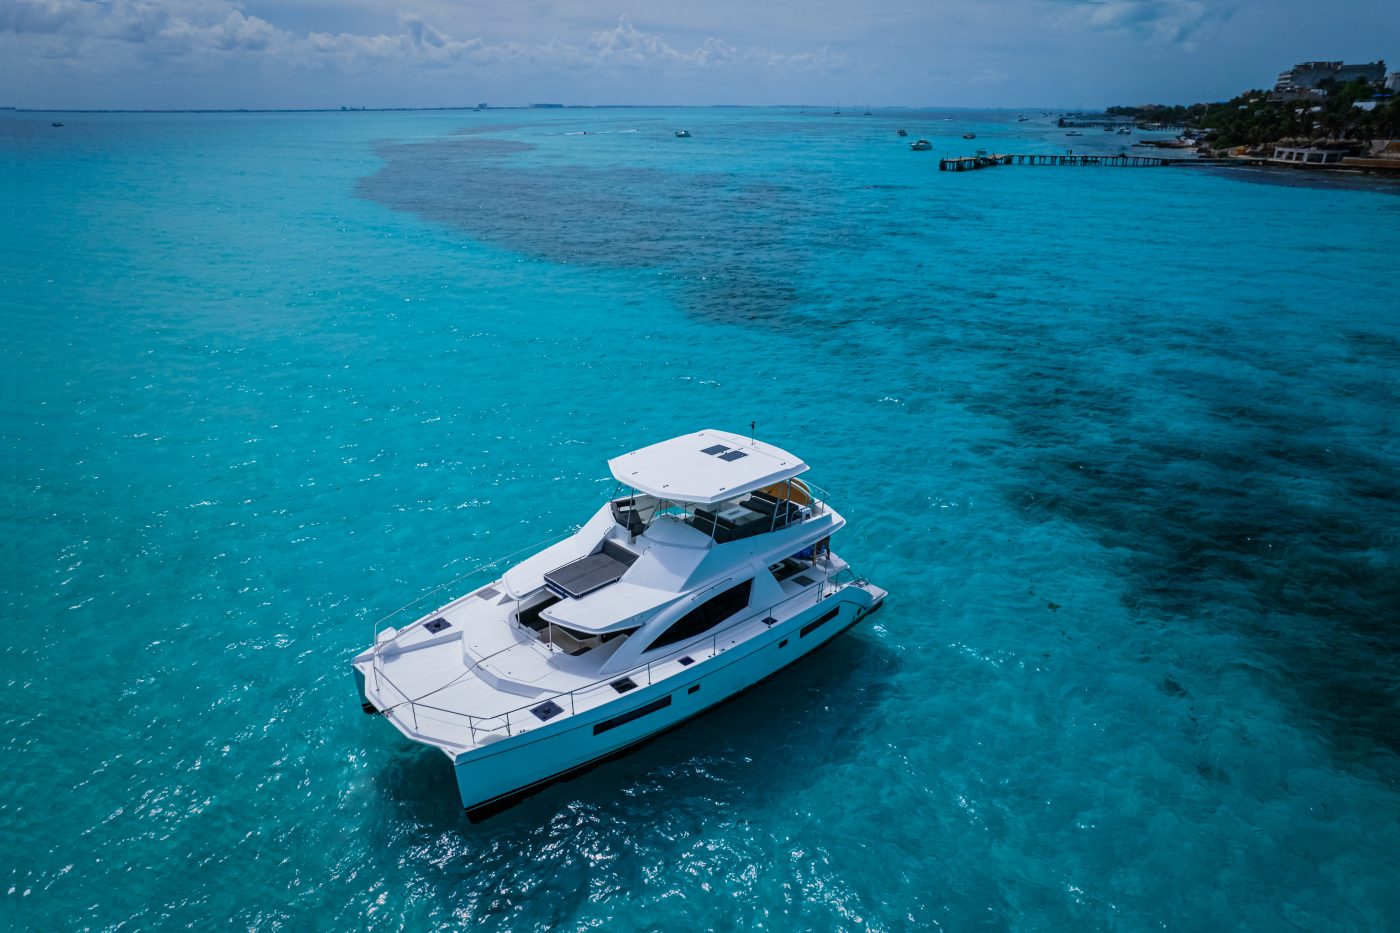 Leopard Catamaran for Luxury Yacht Charters from Cancun Holbox